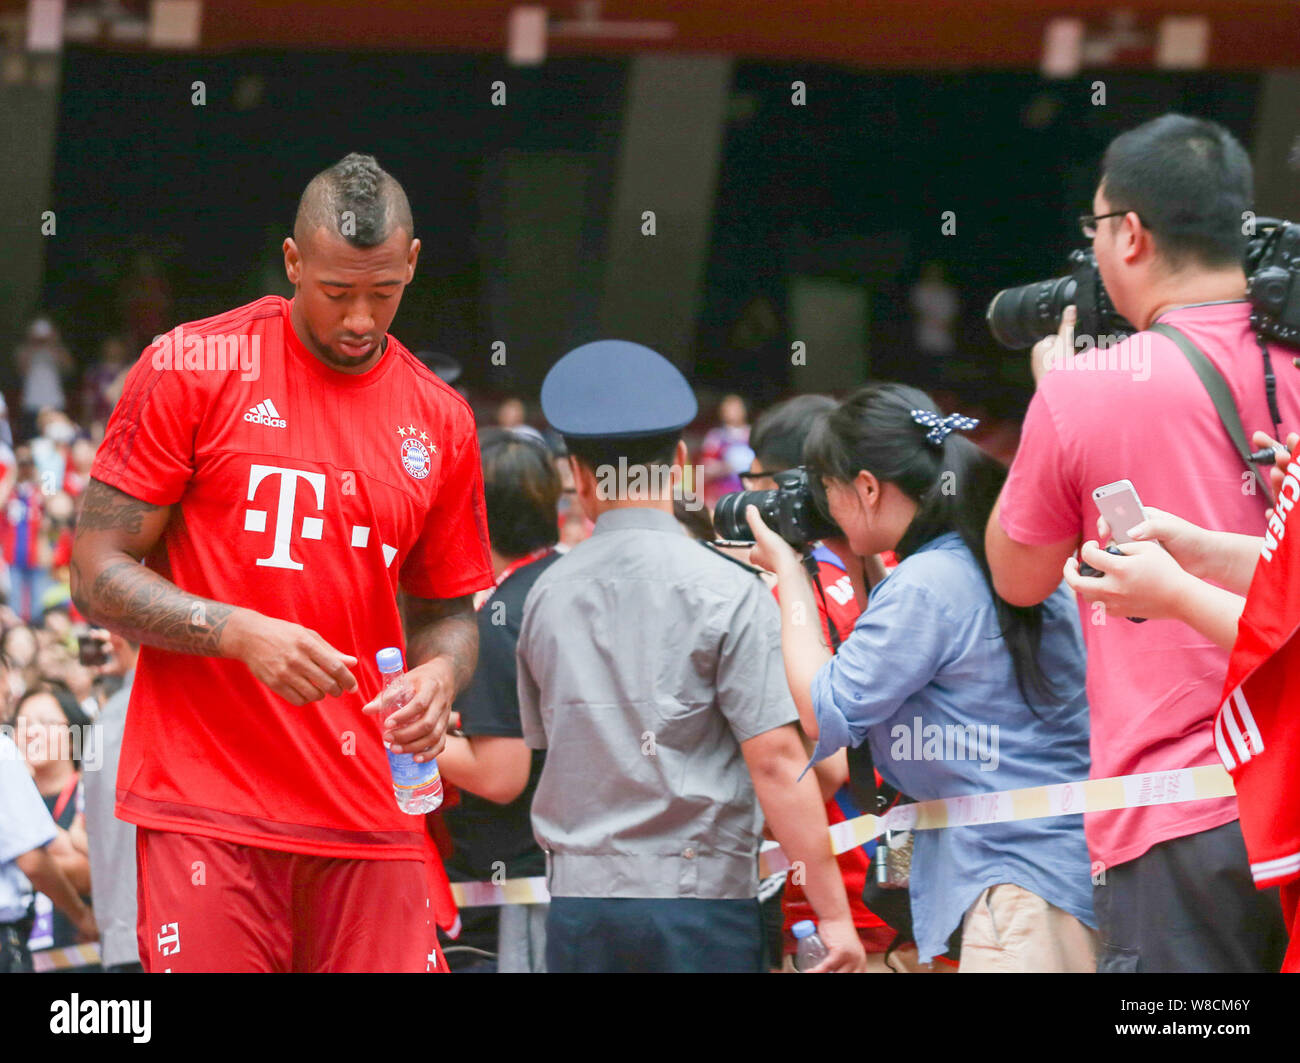 Jerome Boateng of Bayern Munich FC, left, arrives at a training session for the Audi Football Summer Tour China 2015 in Beijing, China, 17 July 2015. Stock Photo